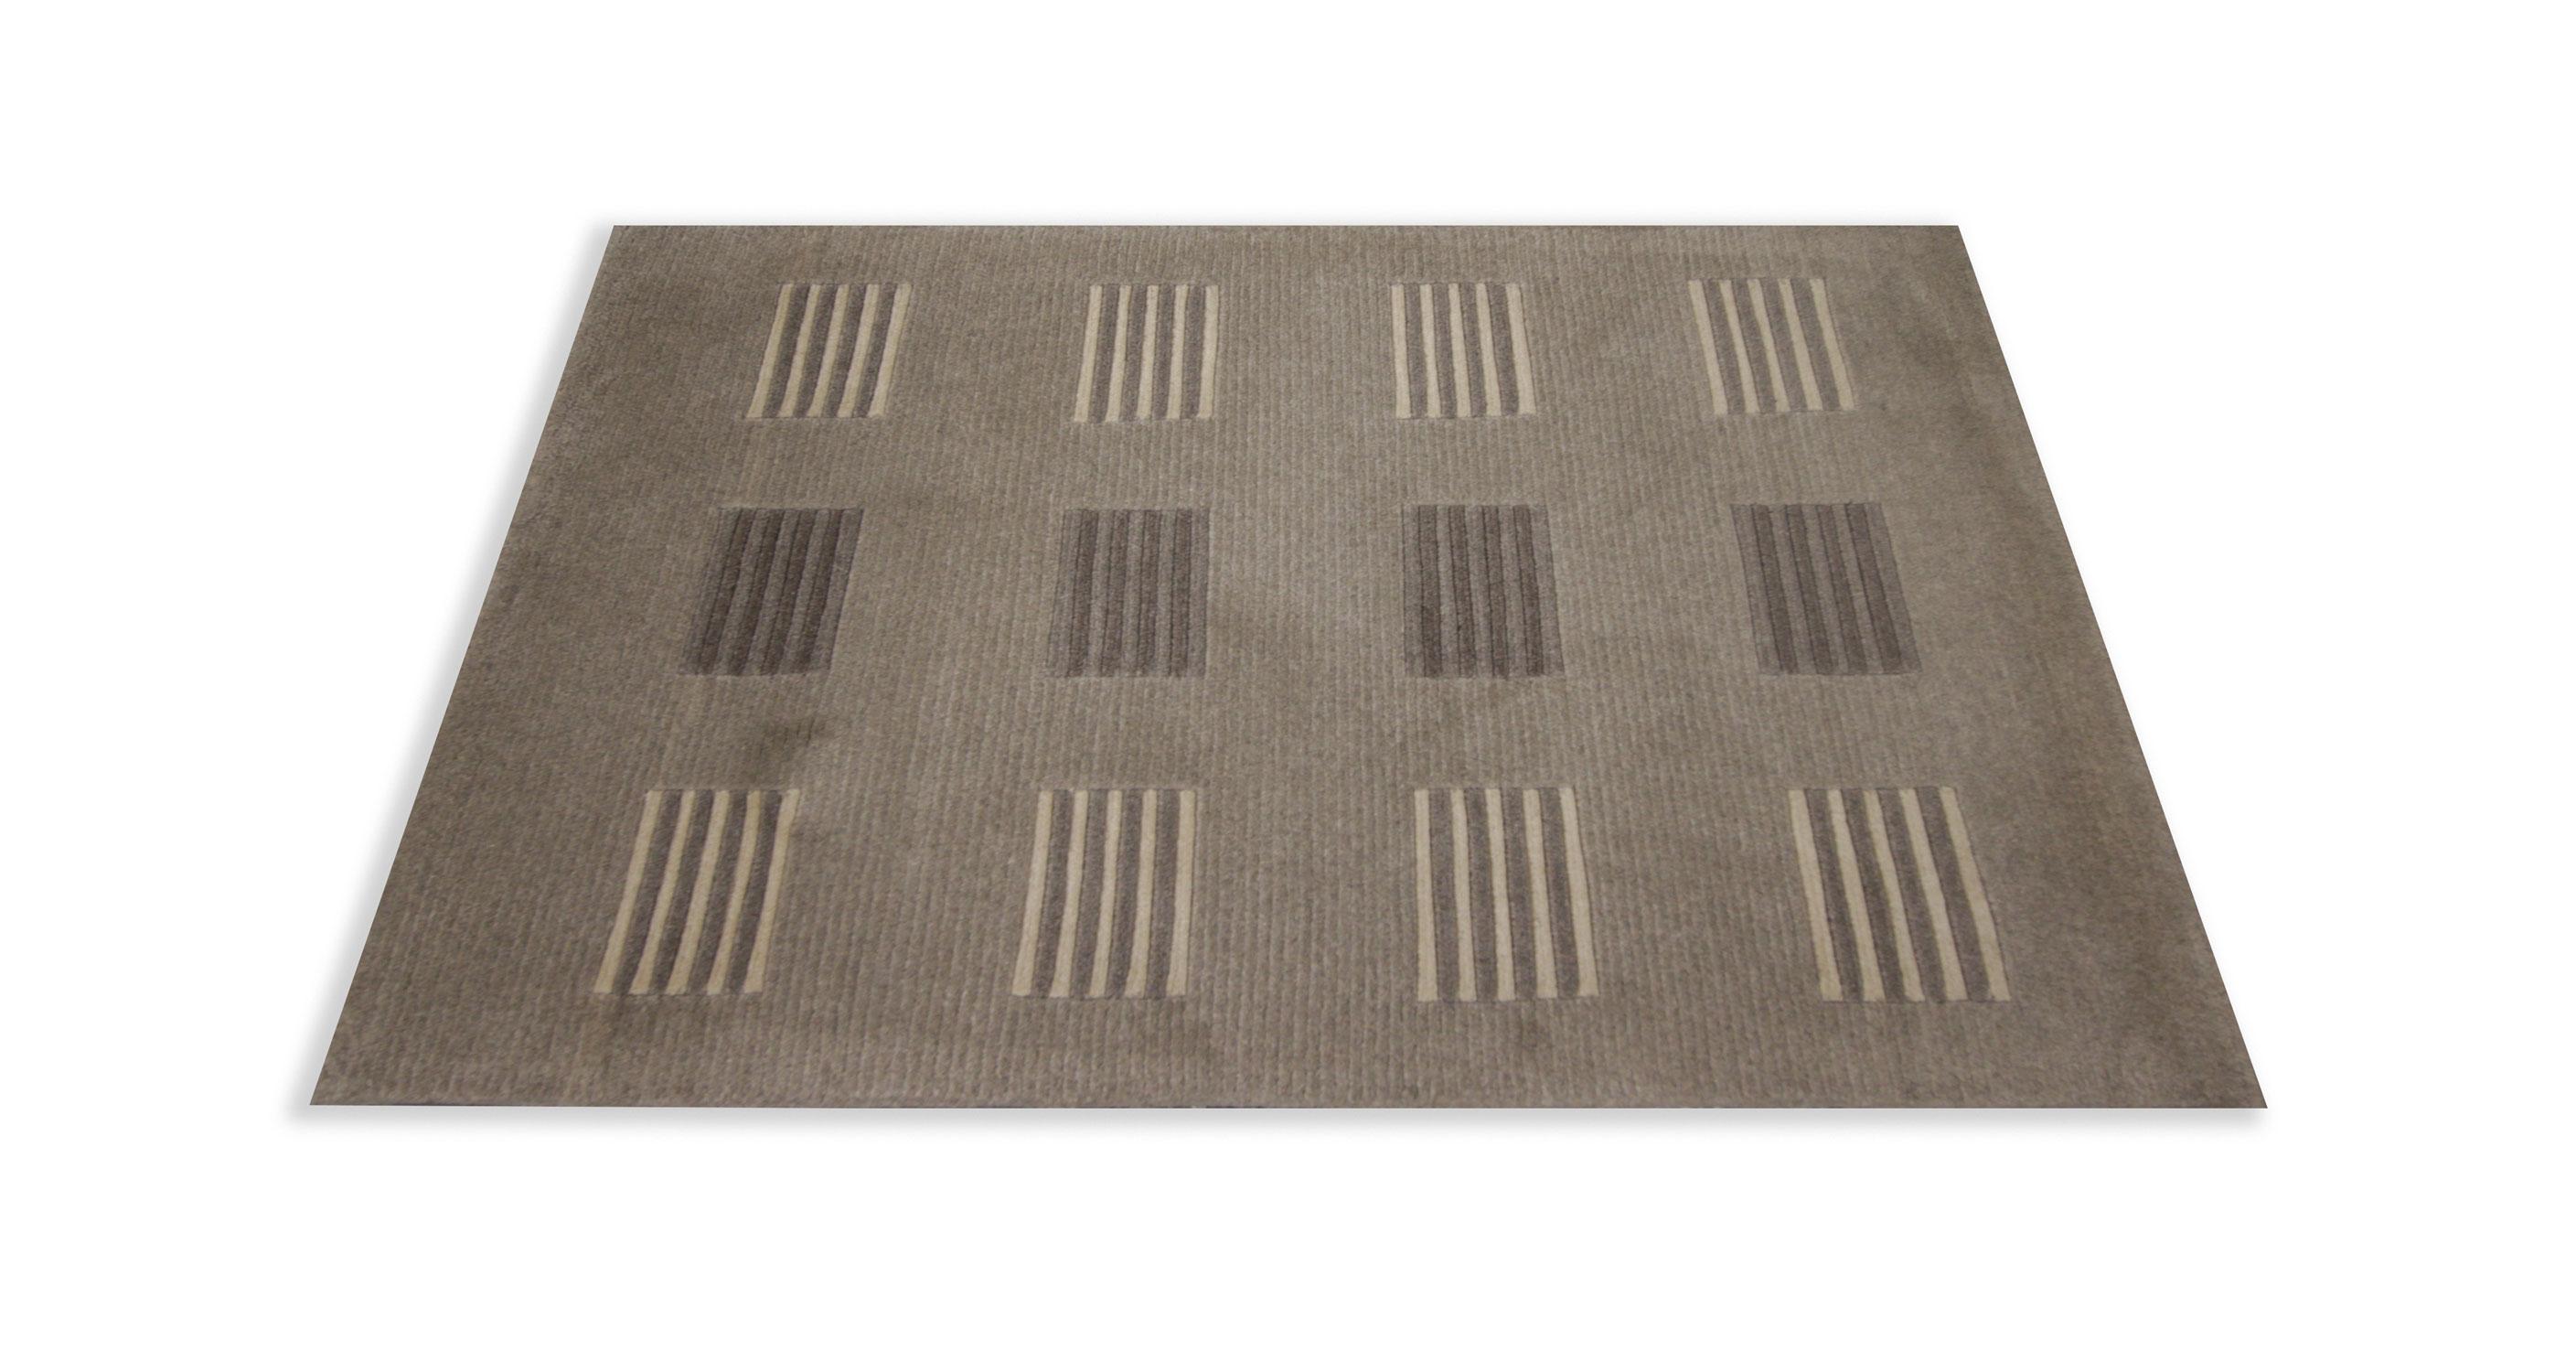 This fine wool mat is the perfect front or back door accessory. Woven by hand with fine wool and cotton that has been dyed with organic vegetable dyeing techniques. The design features a simple beige background with a modern square stripe design.